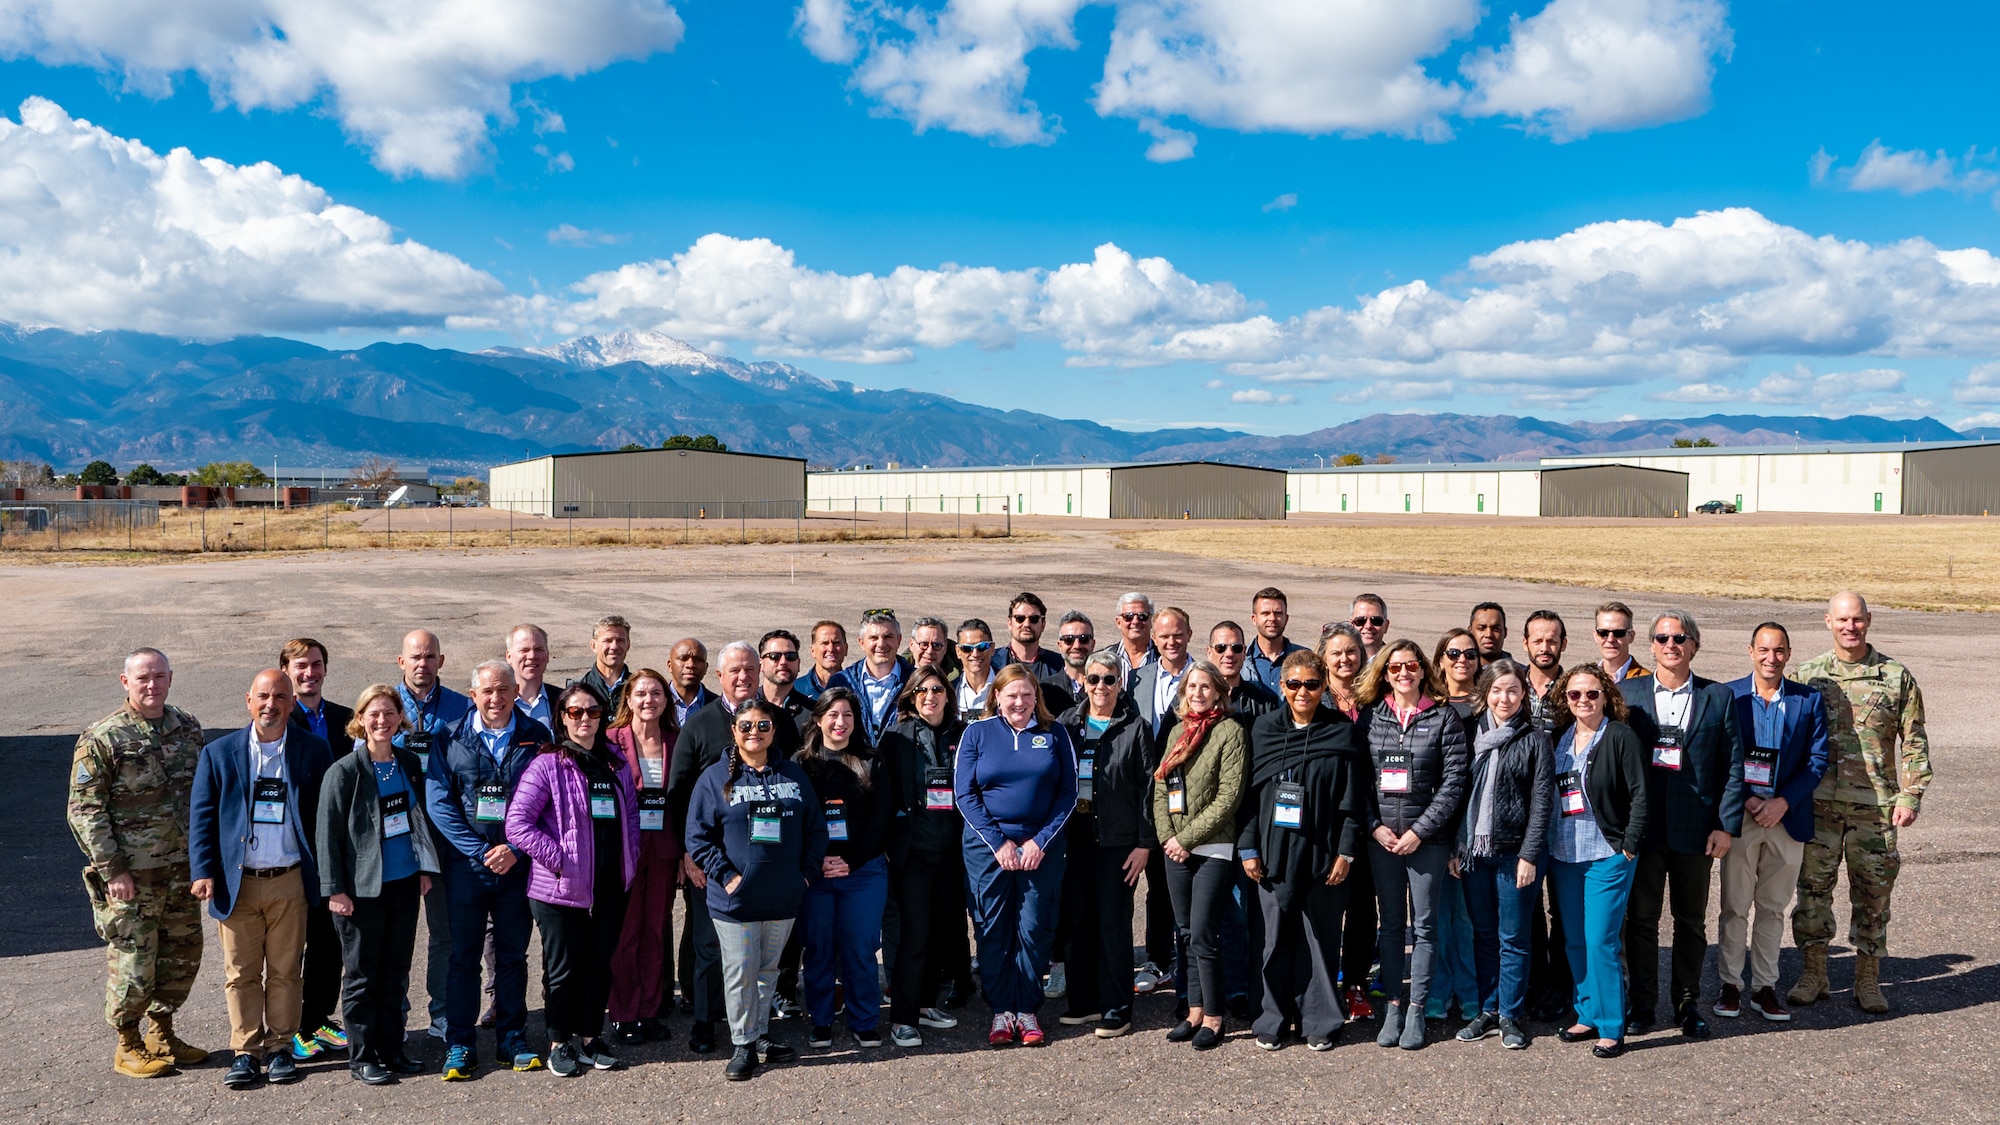 Members of Joint Civilian Orientation Conference Class 93 pose in front of Pikes Peak before visiting Peterson and Schriever Space Force Bases in Colorado Springs, Colorado, Oct. 24, 2022. While the JCOC program was established in 1948, this is the first year the class received a Space Force immersion day. During their visit, attendees of the JCOC met with senior Space Force leaders and Guardians and received mission briefs from the 2nd Space Operations Squadron and 527th Space Aggressor Squadron. (U.S. Space Force photo by Dave Grim)